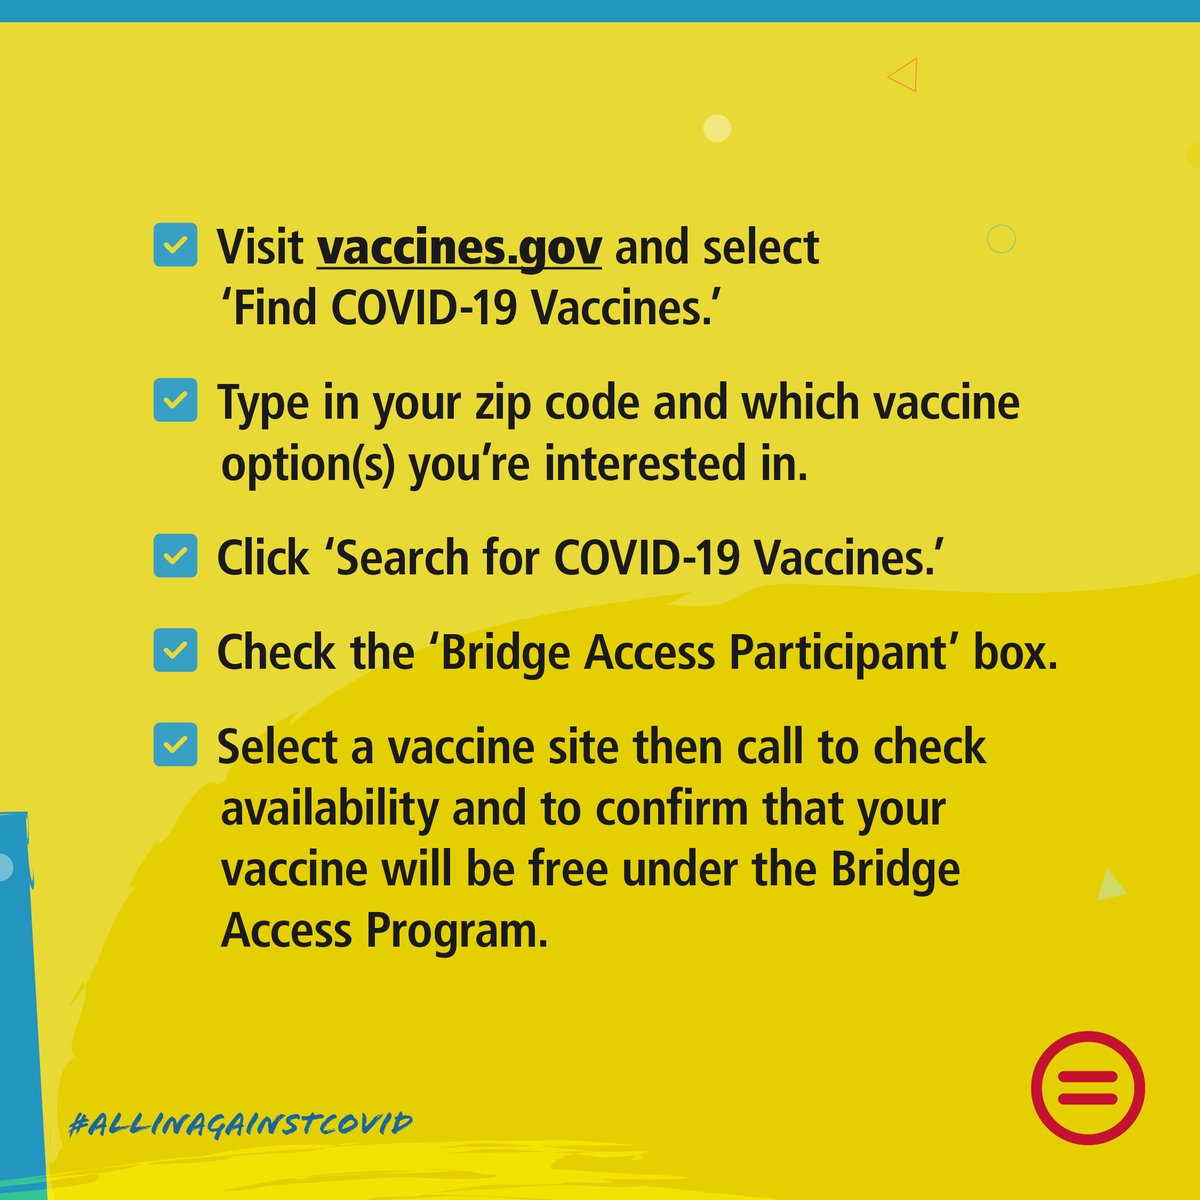 Make sure to visit vaccine.gov or call the COVID-19 Vaccine Hotline at 1-800-232-0233 if you have questions. #AllinAgainstCOVID